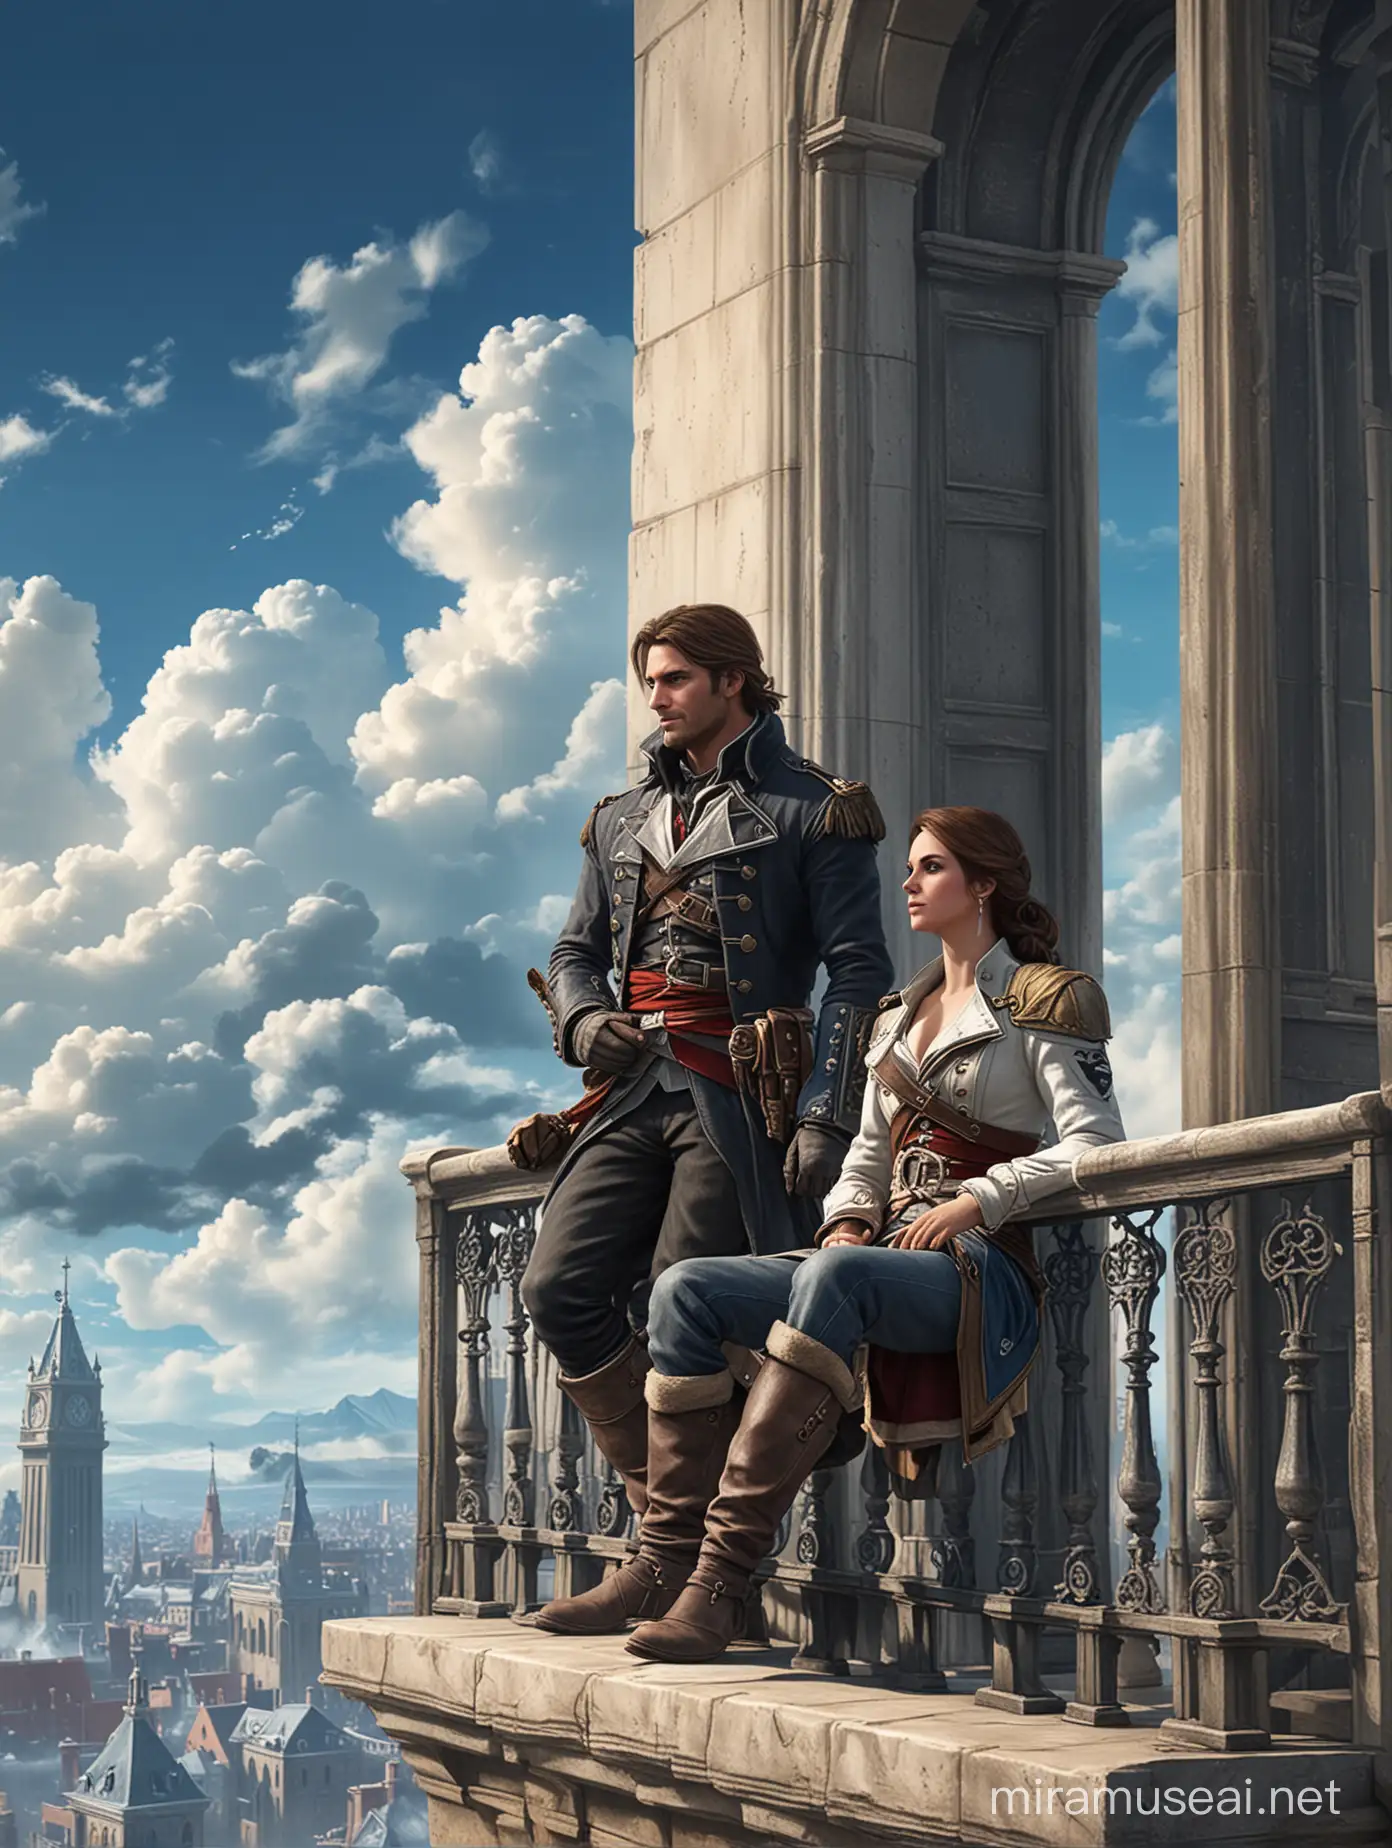 Shay patrick cormac from assassin's creed rogue sitting on a Balcony with lana Del rey year 1750 newyork clouds blue sky background 